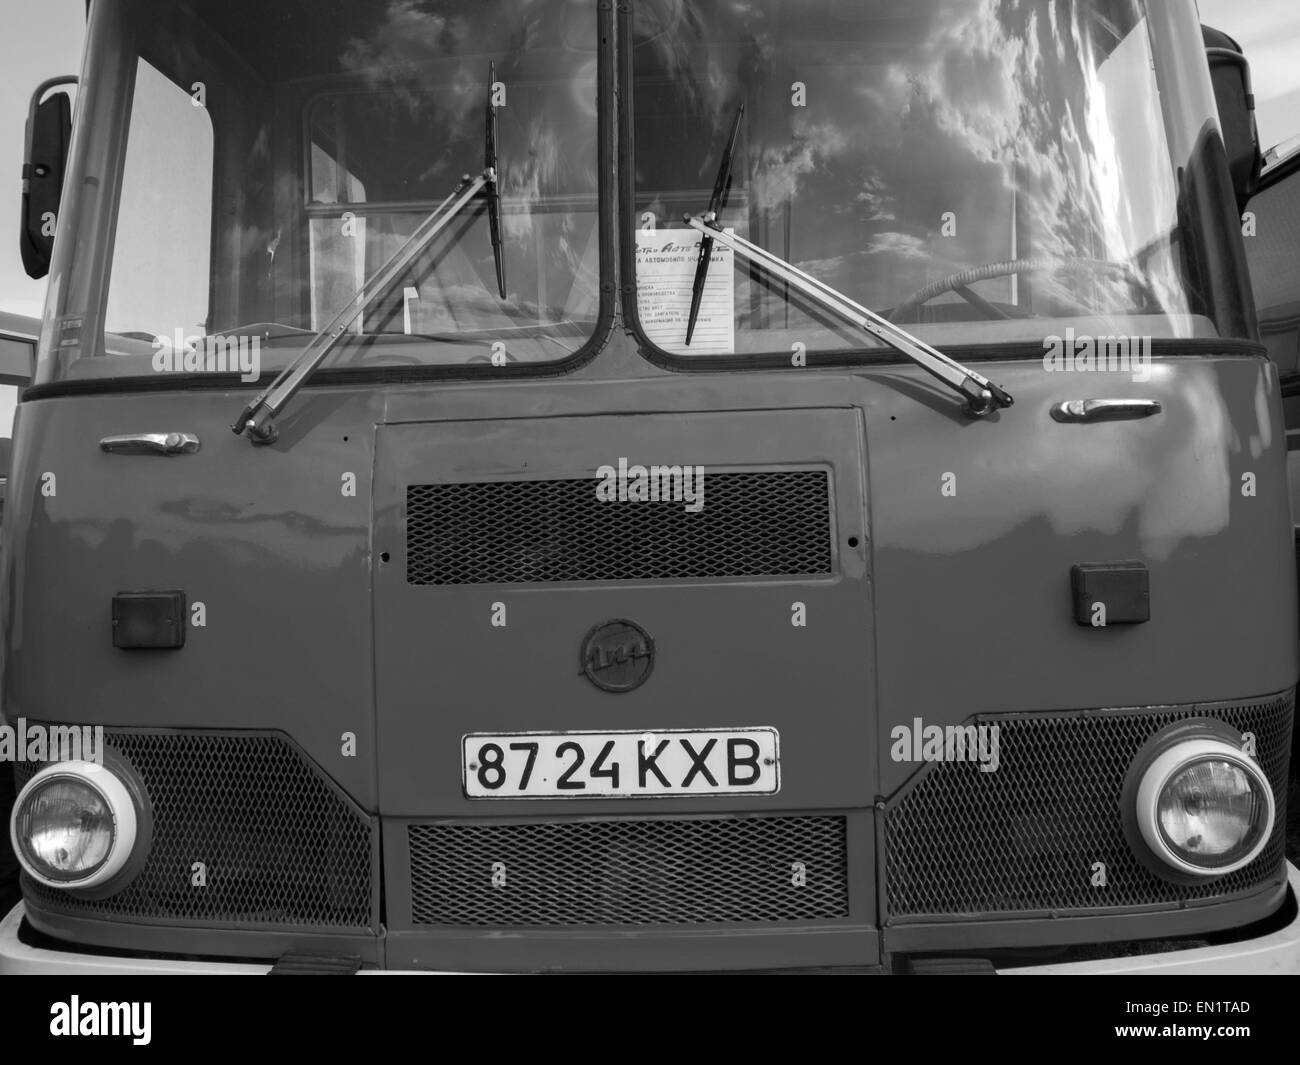 April 25, 2015 - Bus LiAZ-677 -- The Retro OldCarFest is the biggest retro cars festival held in Kiev, and covers the State Aviation Museum grounds. More than 300 cars are involved into this project and more than 20 thousand visitors are expected to attend. © Igor Golovniov/ZUMA Wire/Alamy Live News Stock Photo